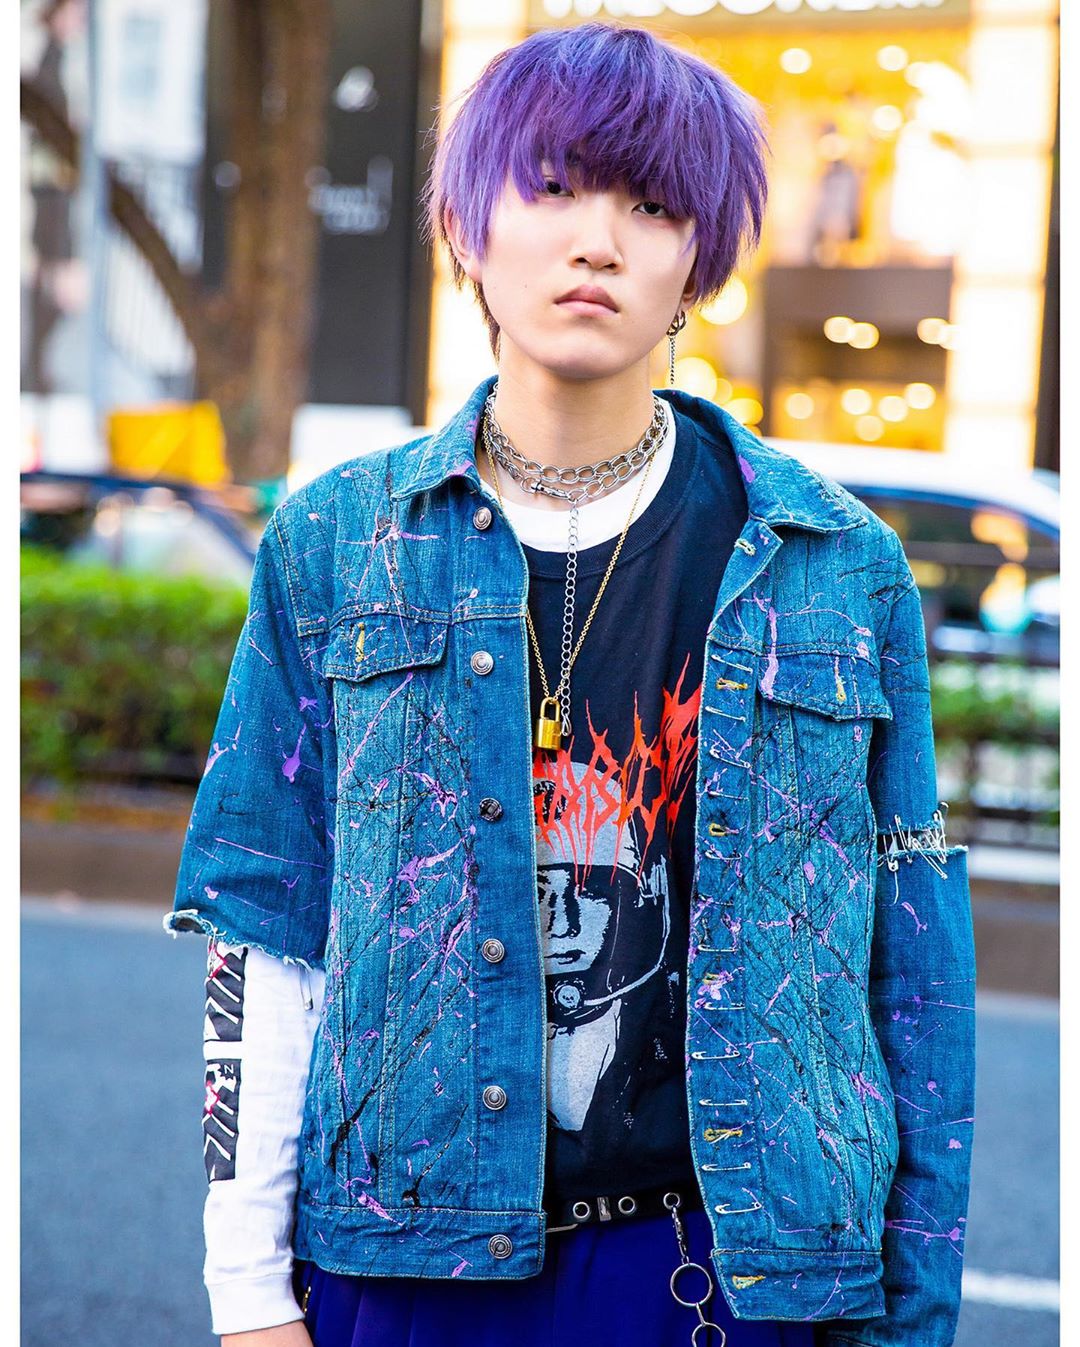 Tokyo Fashion: 19-year-old Japanese student Yuito (@yuito4312wt) on the ...